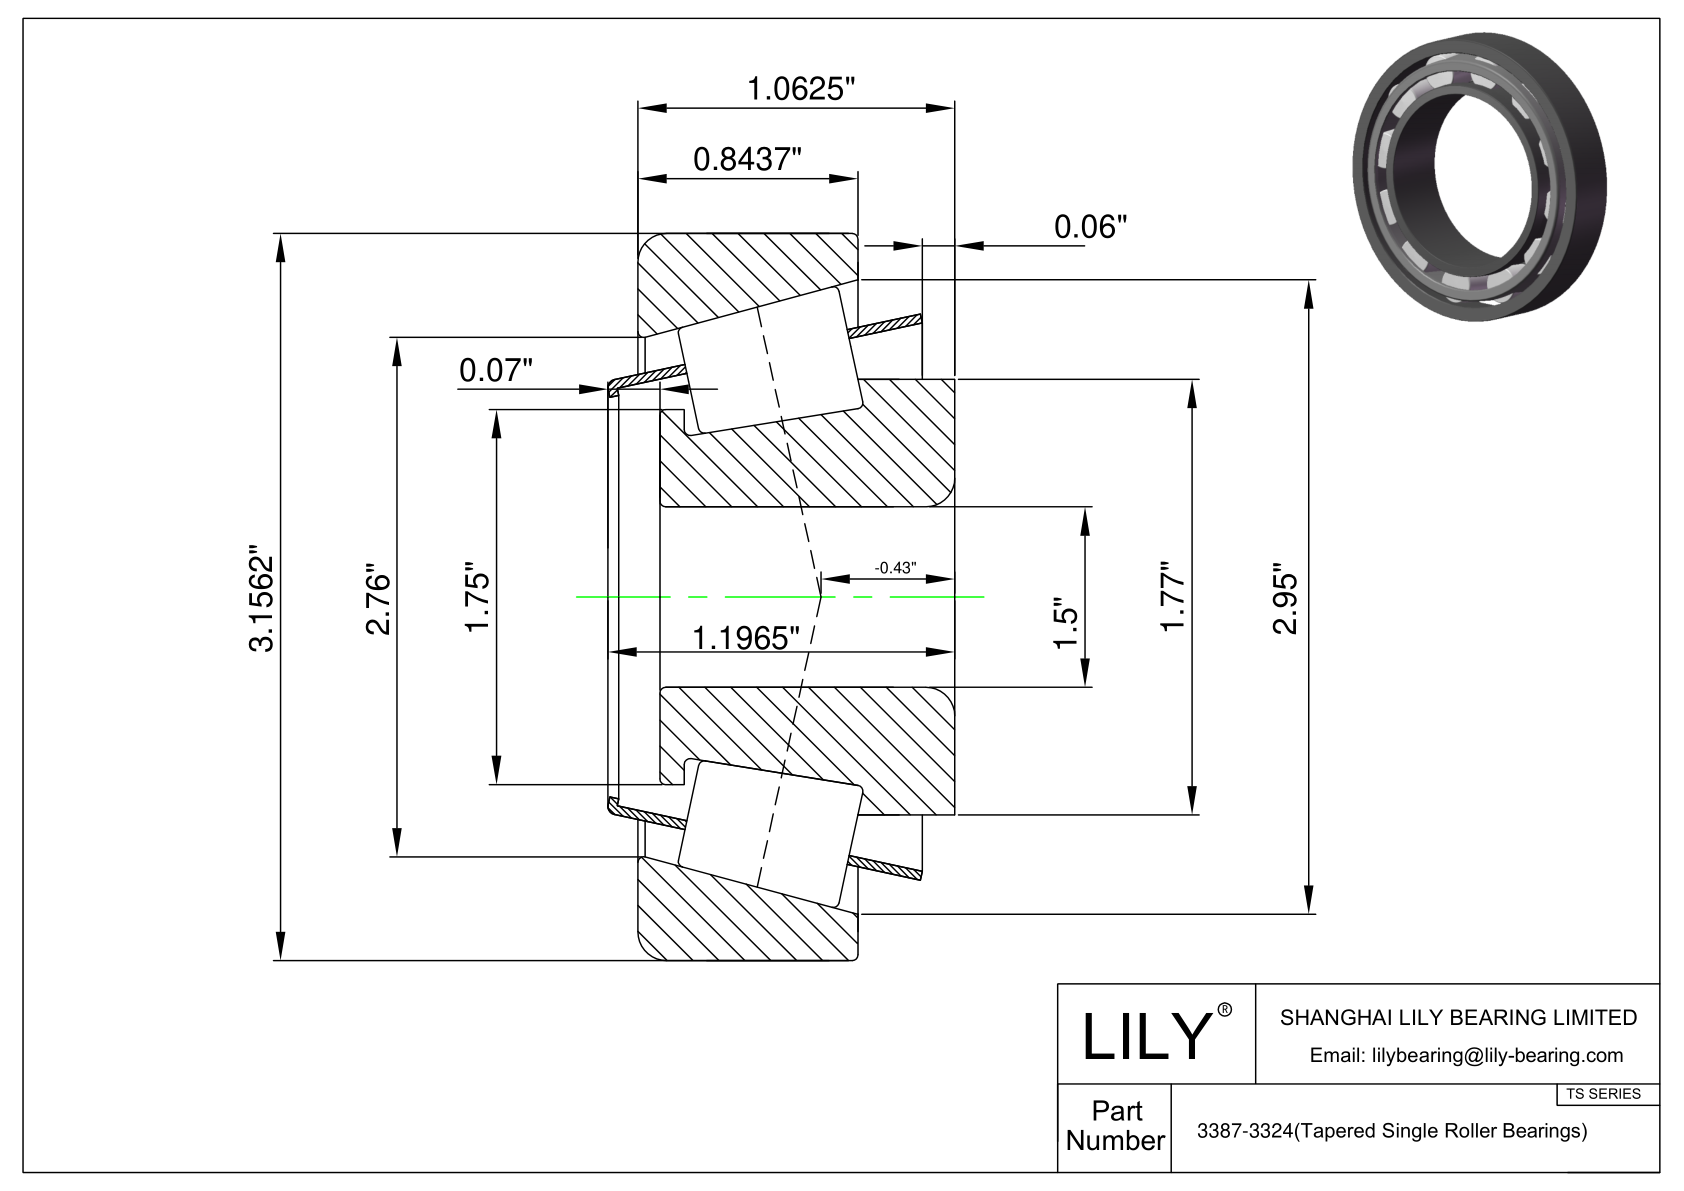 3387-3324 TS (Tapered Single Roller Bearings) (Imperial) cad drawing